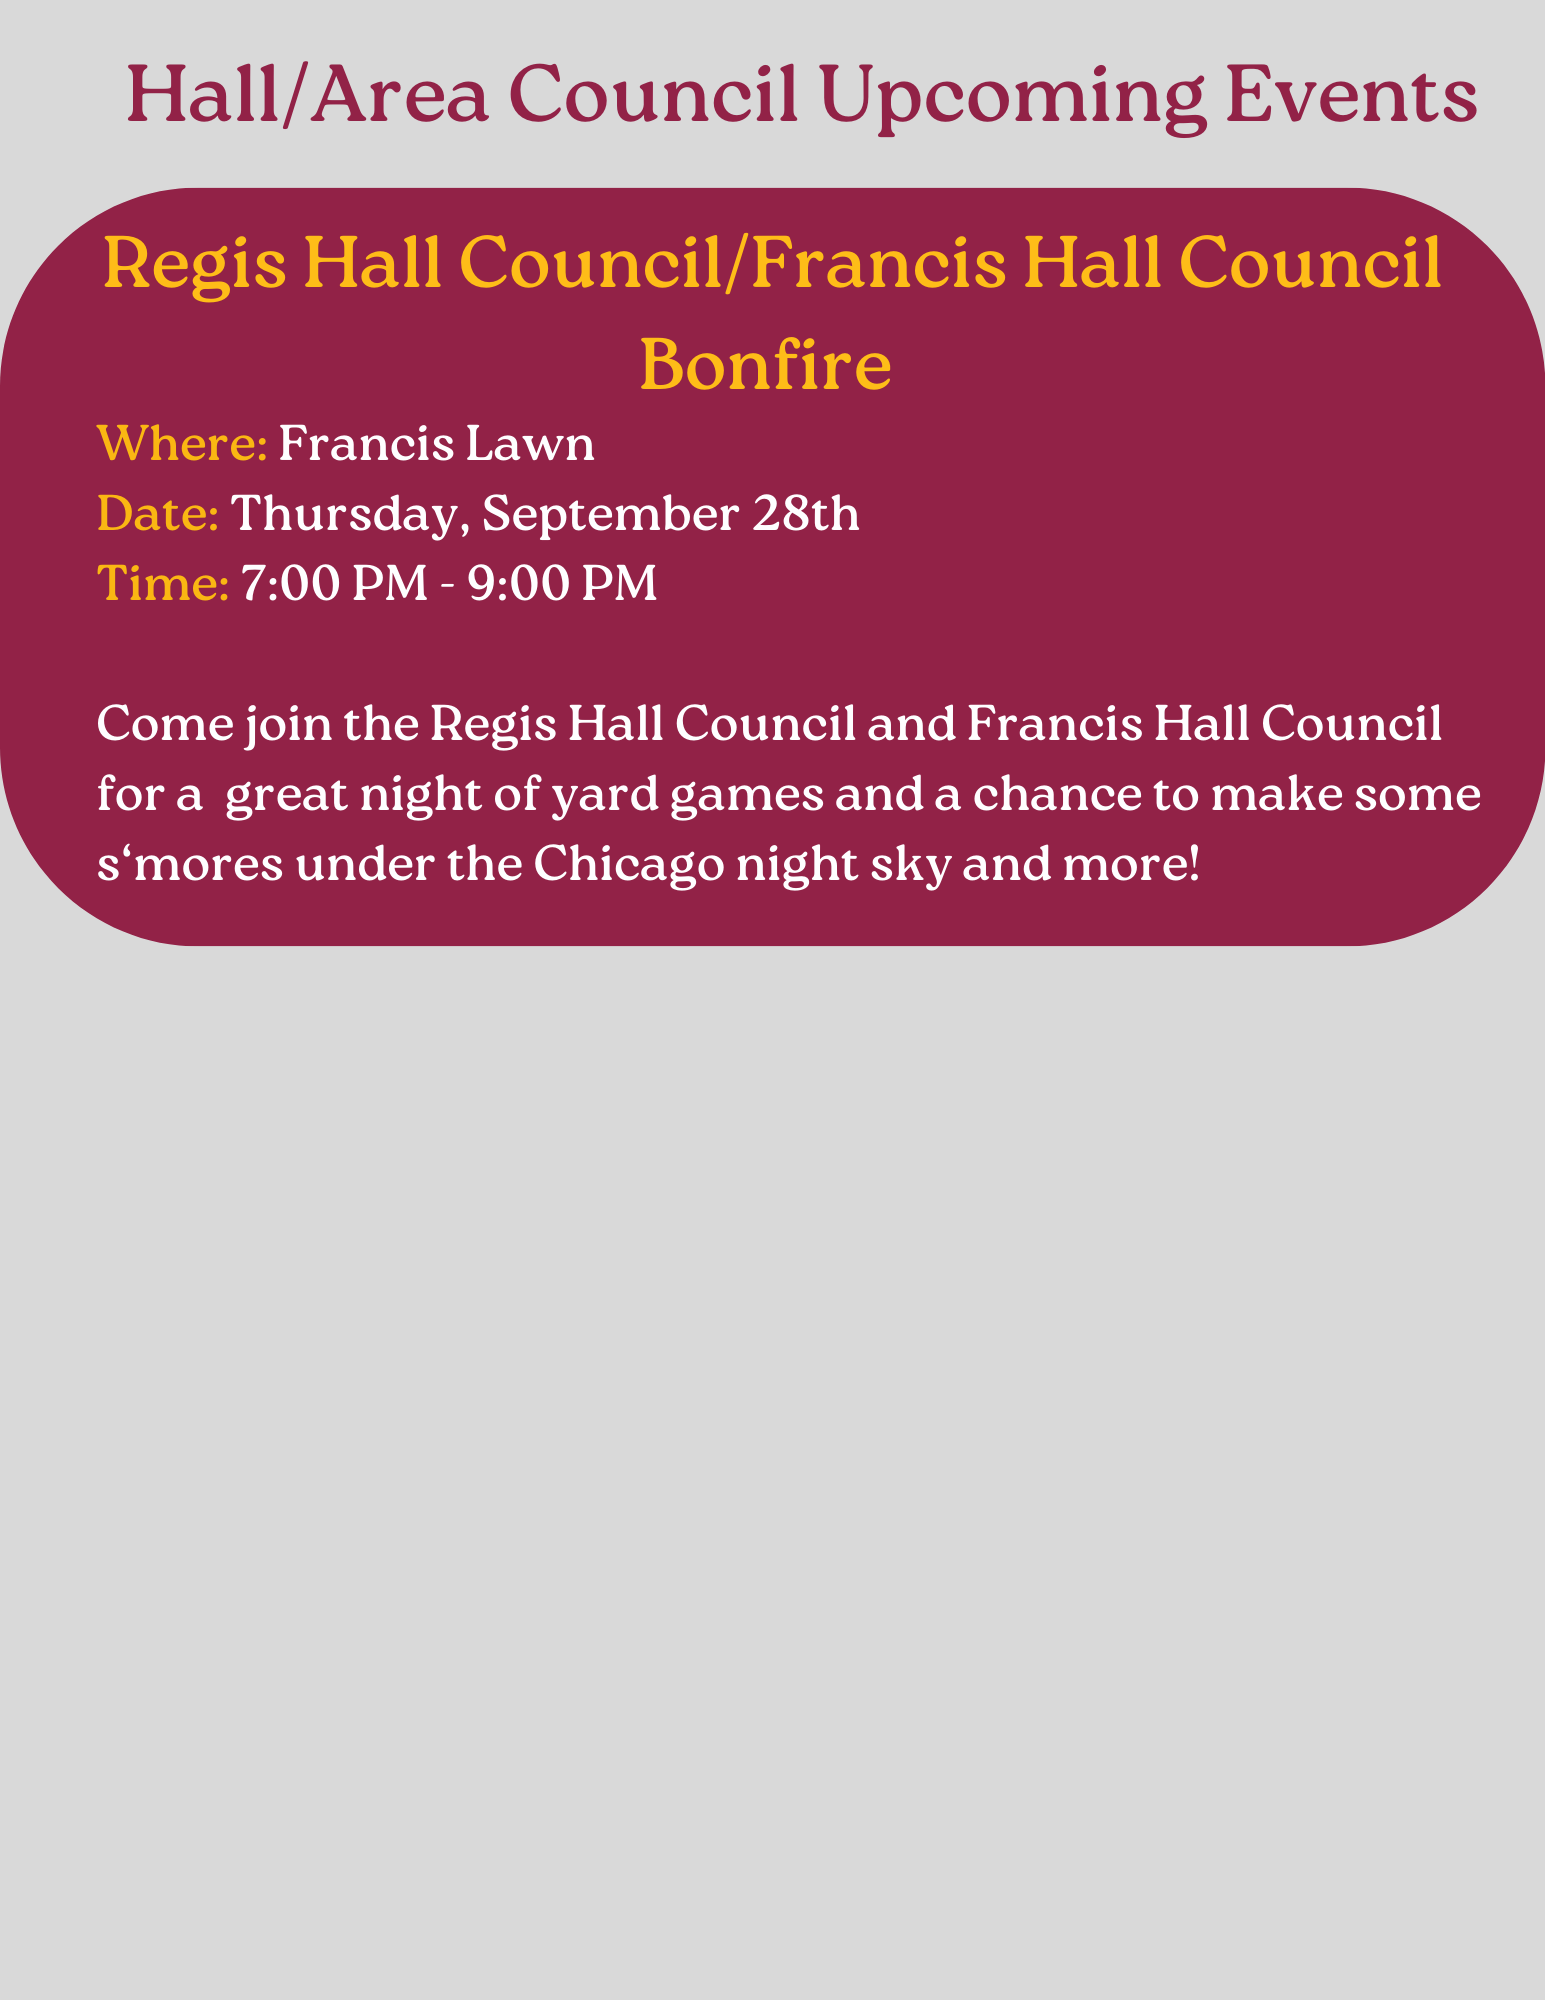 Regis and Francis Event Information